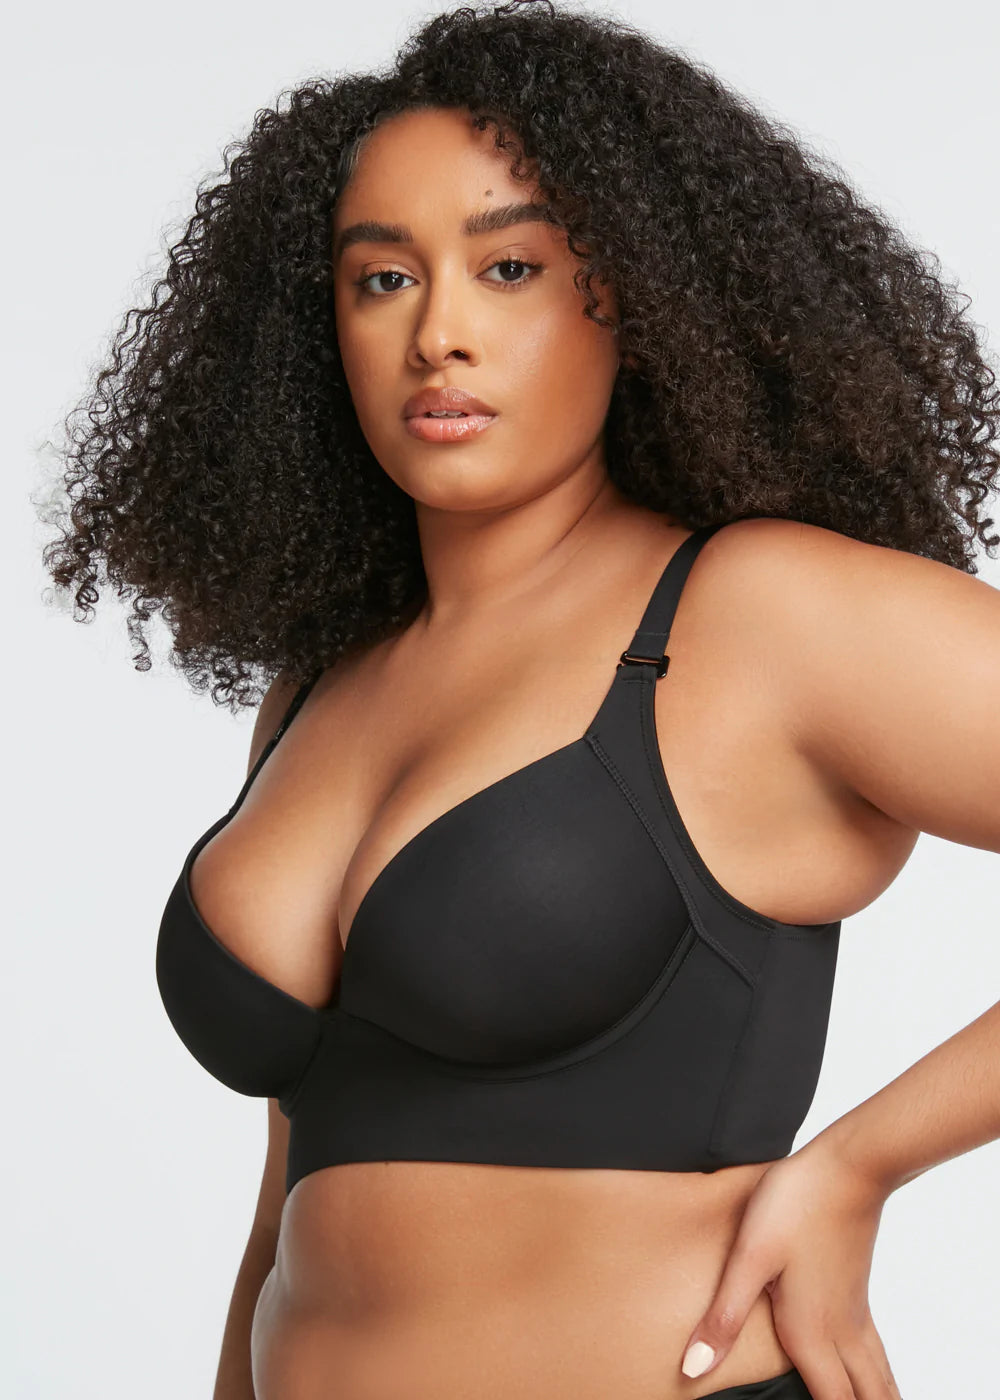 Women's New Style Thickened Push-up Bra, With Steel Wire-free, Anti-droop  And Embroidery Design, To Collect And Adjust For Small Busts